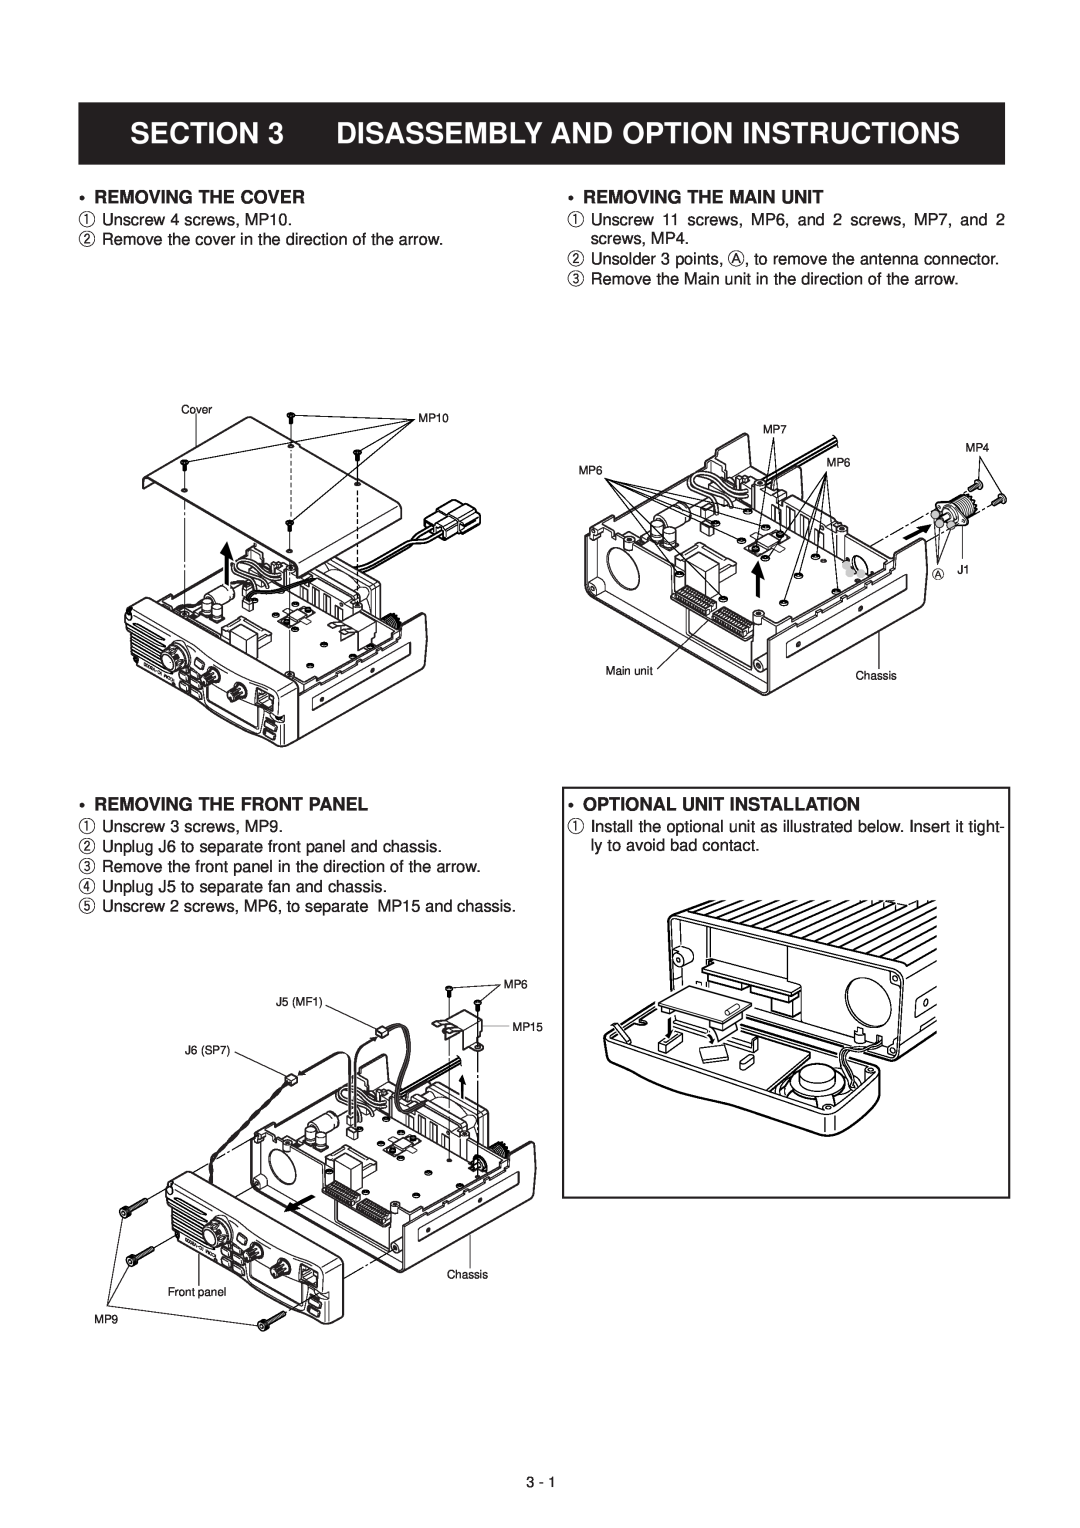 Polaroid IC-V8000 service manual Disassembly And Option Instructions, Removing The Cover, Removing The Main Unit 